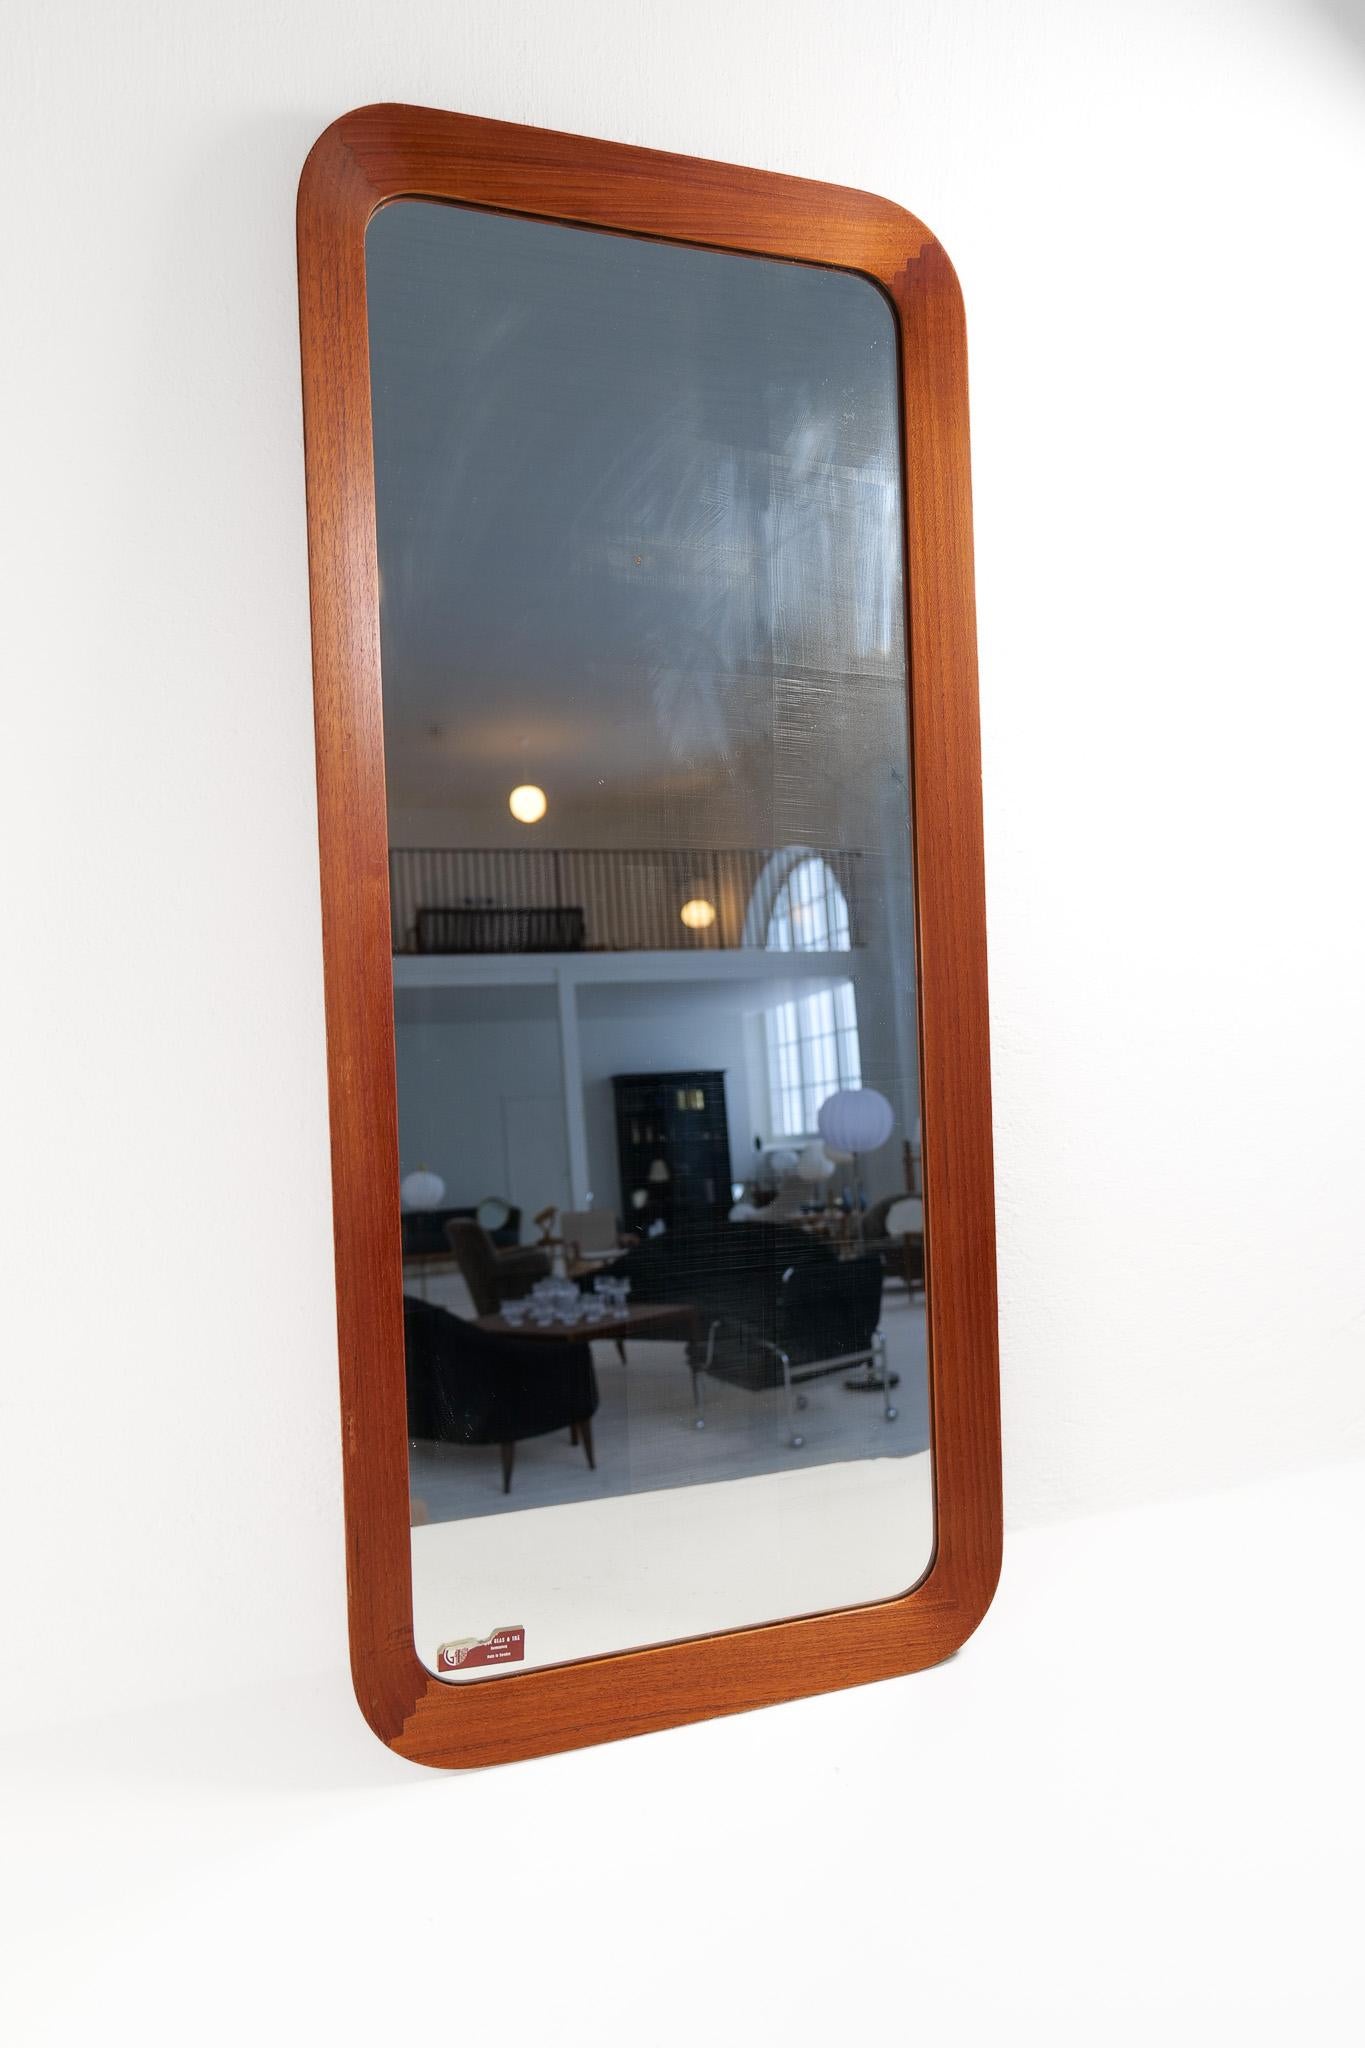 Wonderful organic wall mirror produced by AB Glas & Trä, Hovmantorp, Sweden. In sculpted Teak and crystal mirror glass, labeled. 

Good vintage condition, with some scratches on the wood, distressed/dizzy glass.

Dimensions: Height: 41.3 in. (105cm)